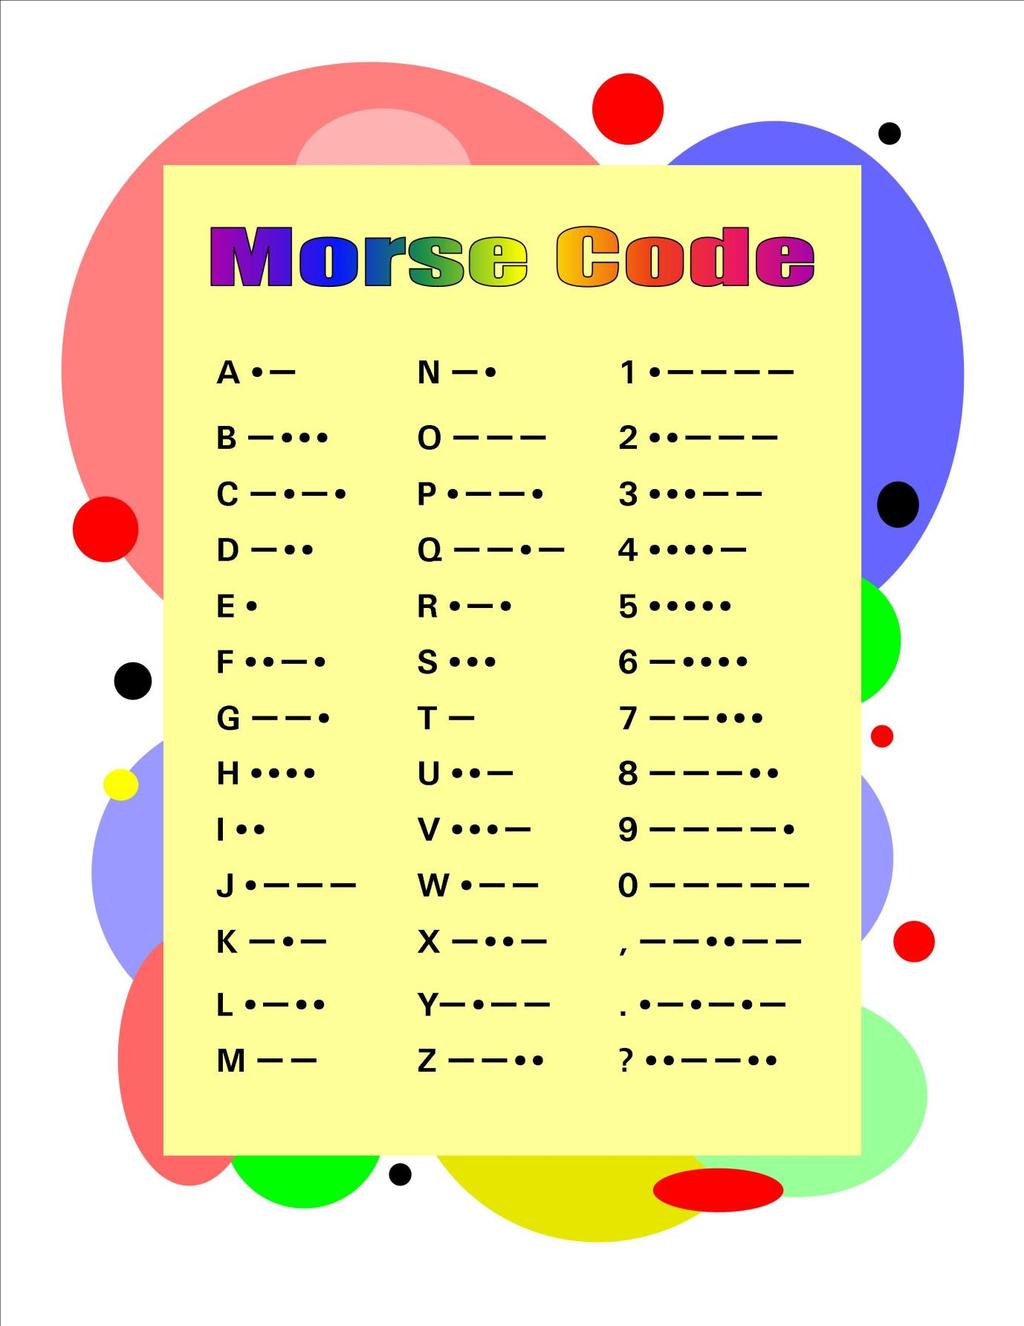 Morse code Morse code is a series of short and long sounds sometimes called dots and dashes, but for learning Morse code